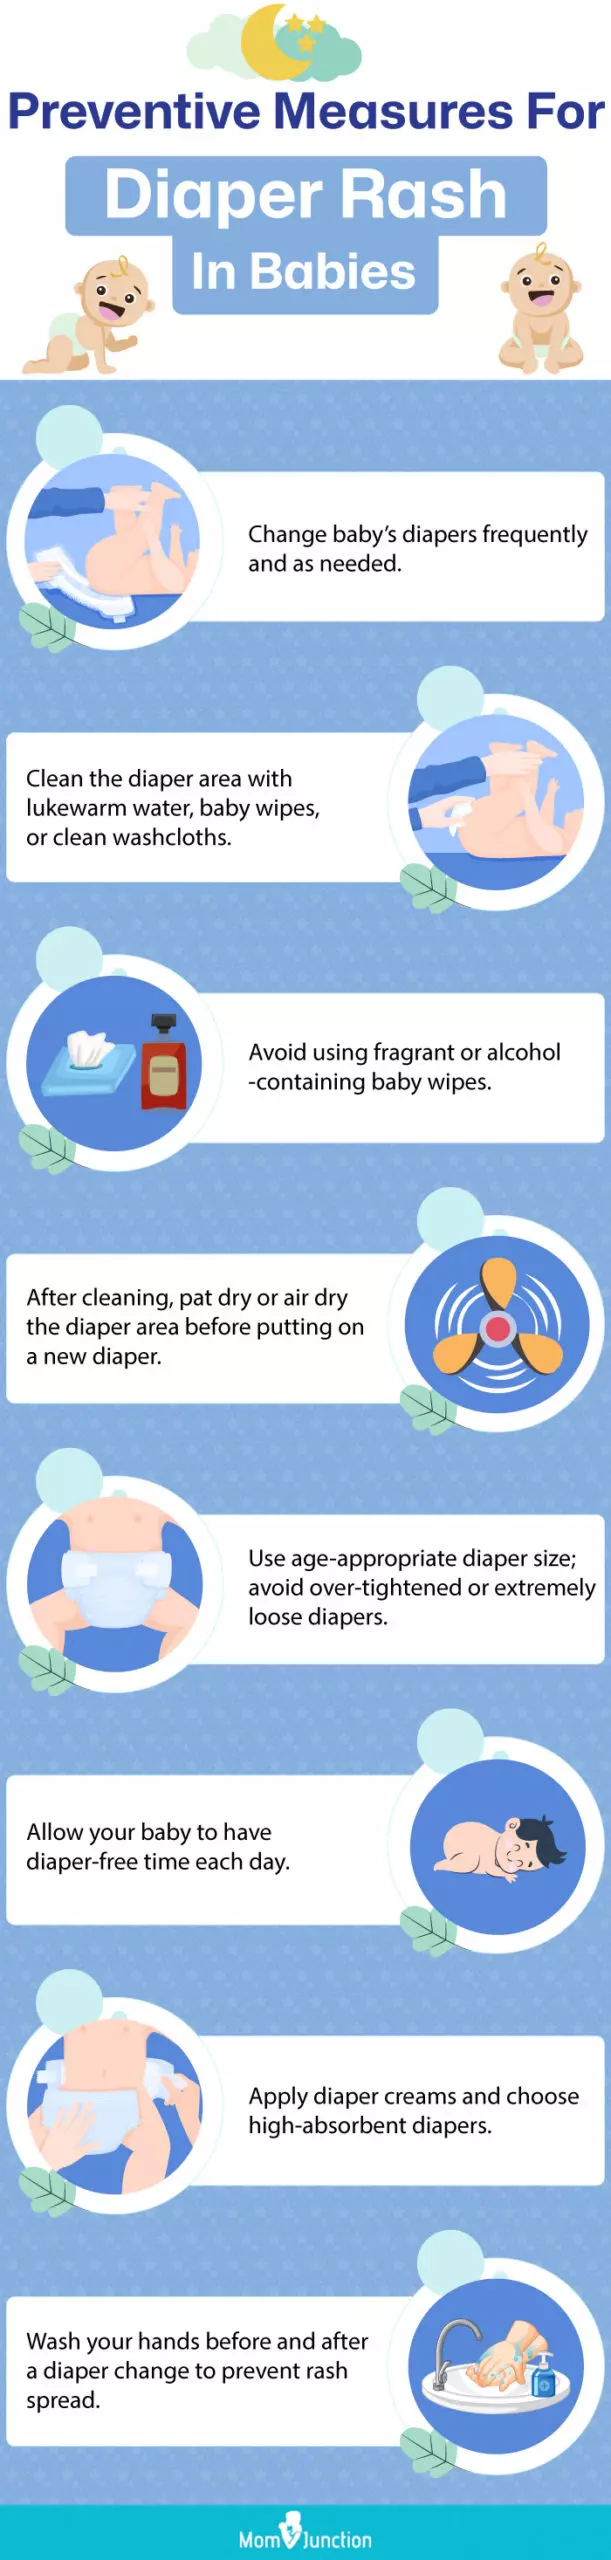 preventive measures for diaper rash in babies (infographic)